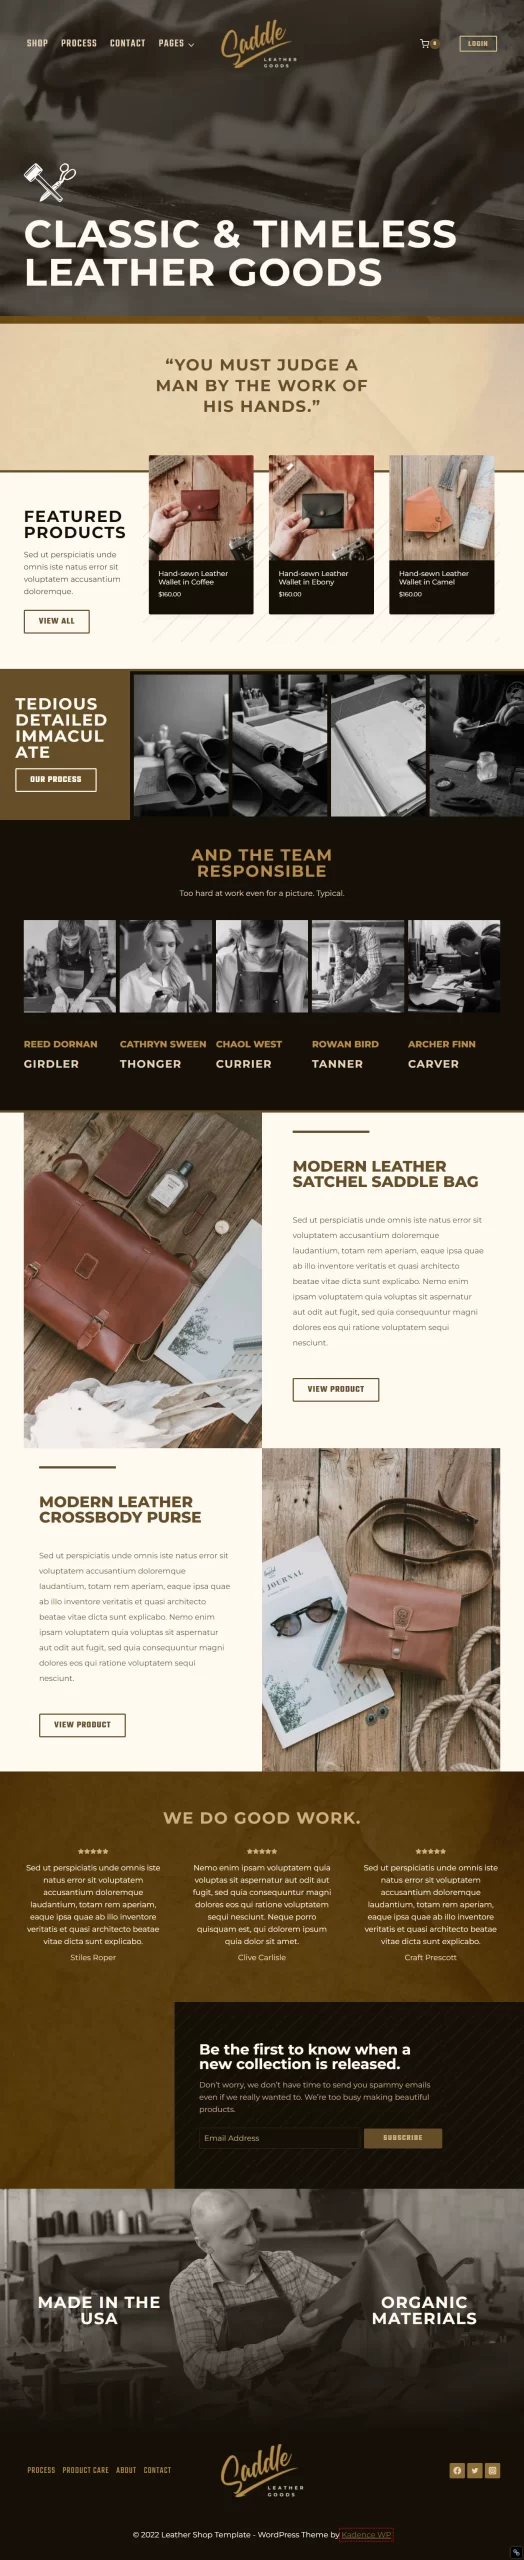 Leather Shop Template Fullscreen scaled